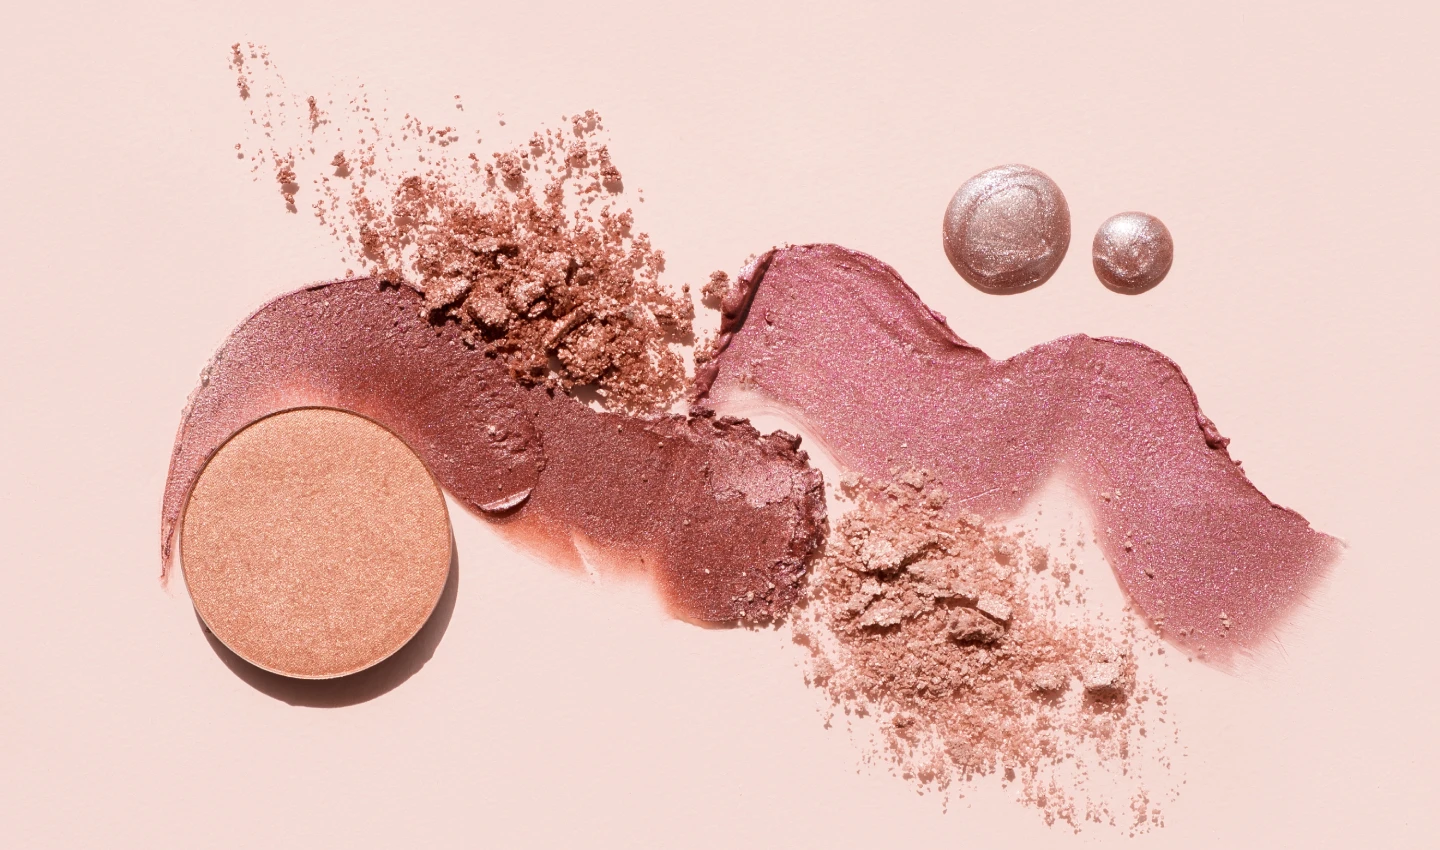 A closeup macro view of different kinds of blushes, showing the various finishes of blush